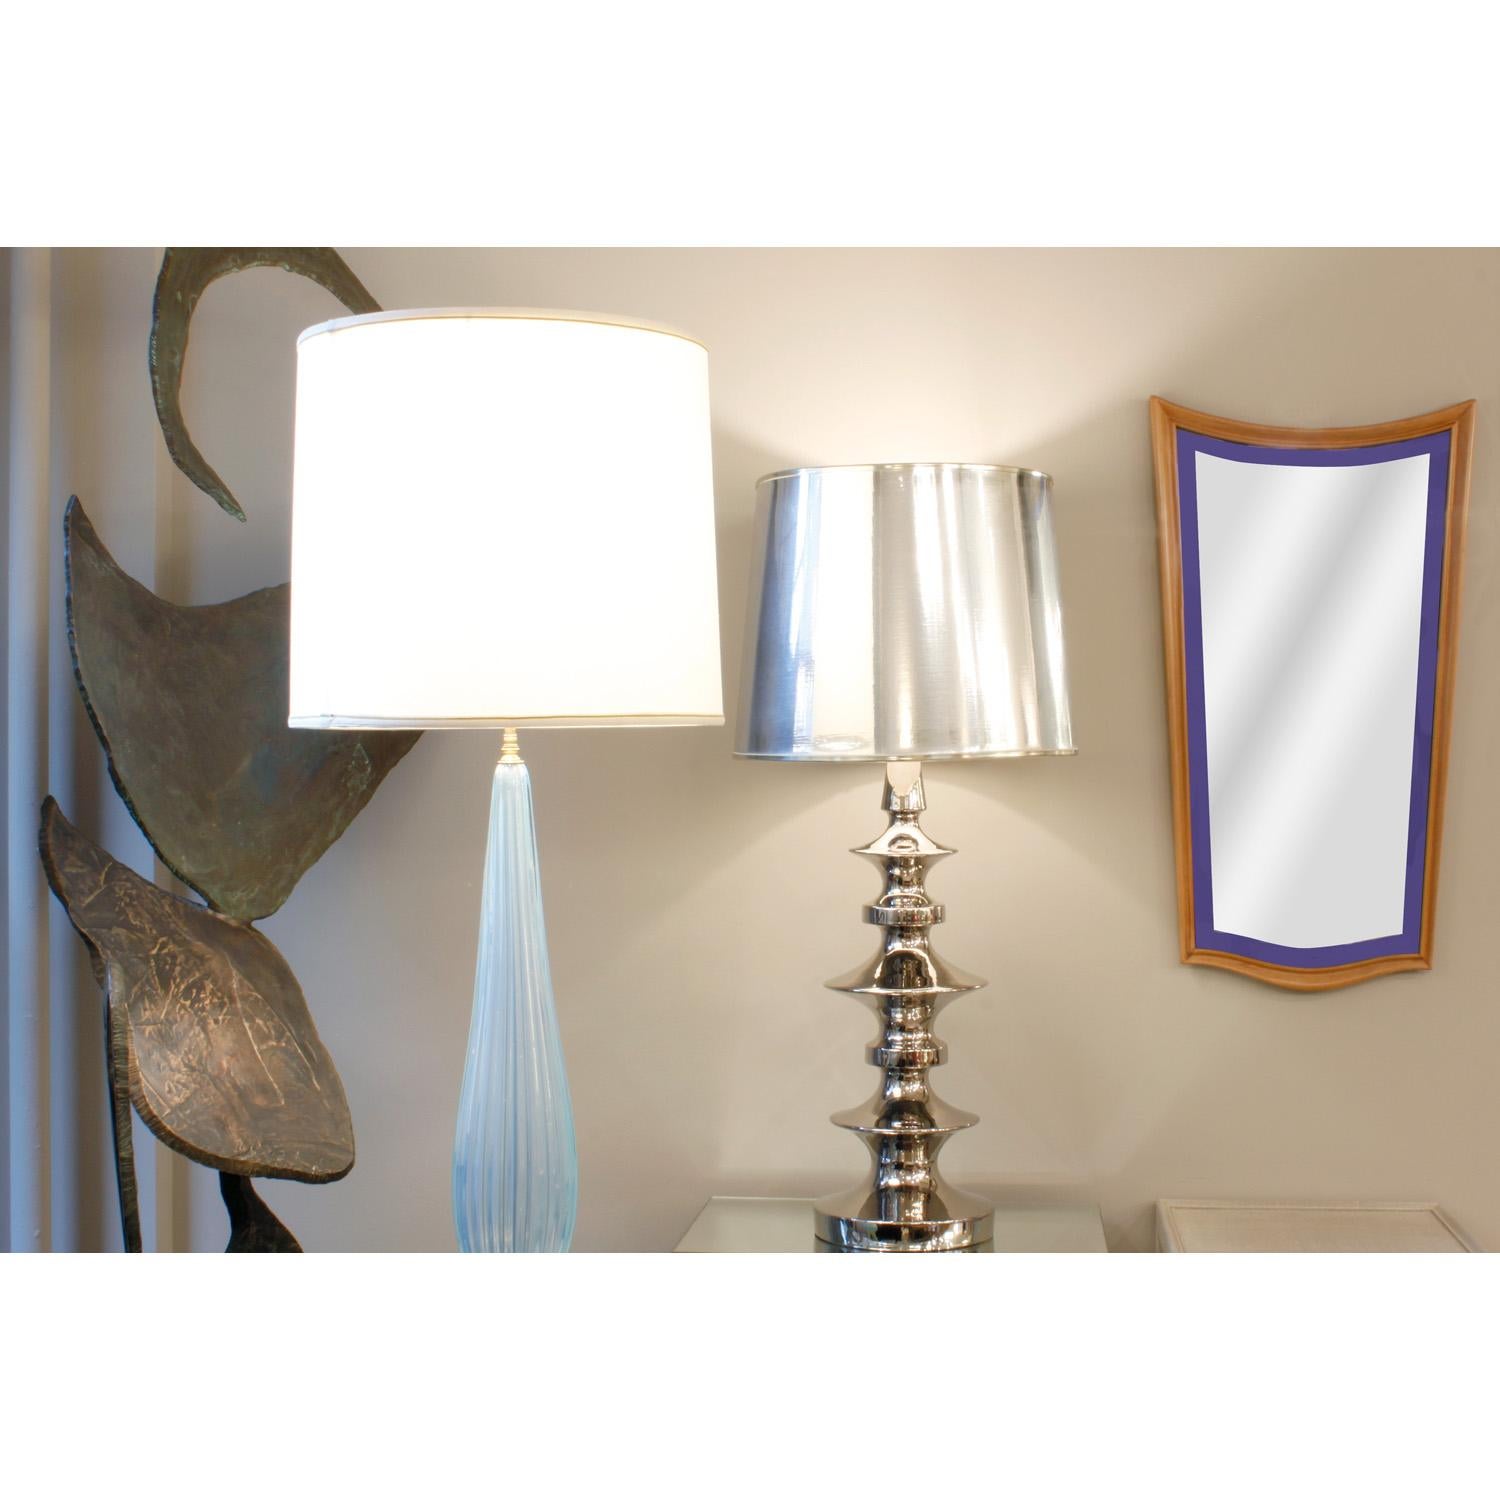 Stunning Italian Art Deco Mirror with Blue Edge 1930s In Good Condition For Sale In New York, NY